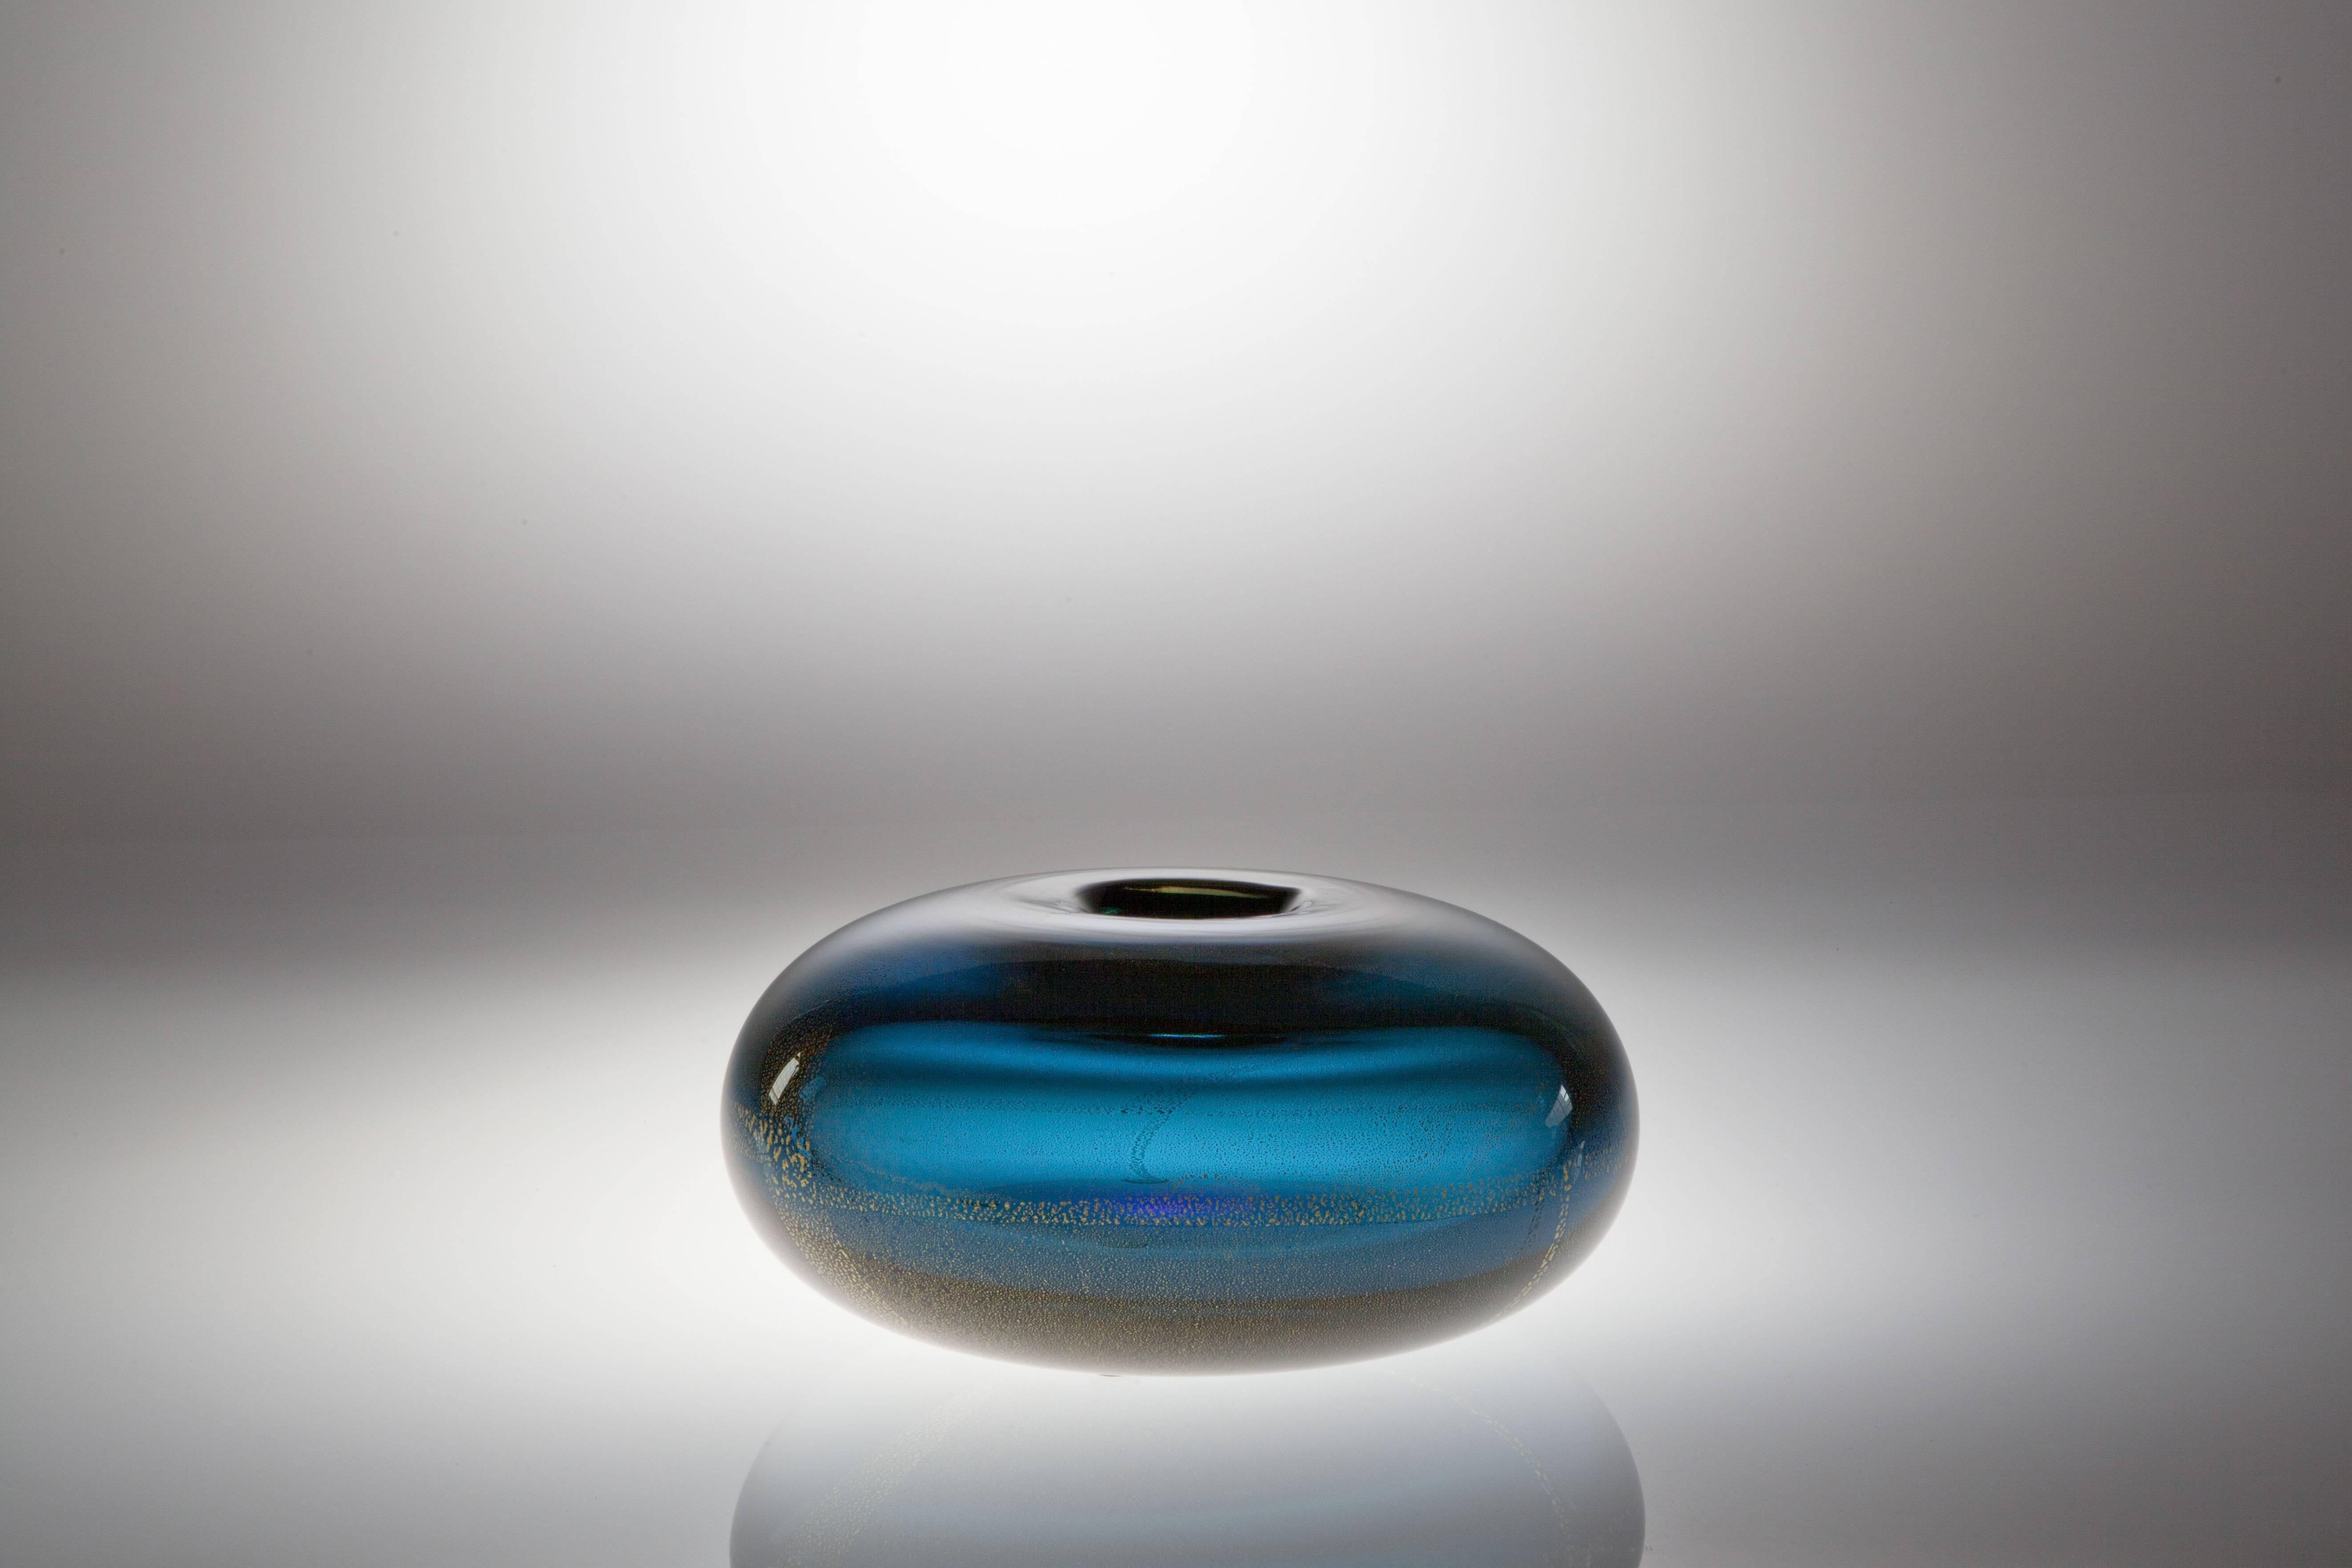 Beautiful sea blue glass vase with gold foil 'Sommersi Oro' ('Submerged Gold'), designed by Laura Diaz de Santillana for Venini, Italy, 1985. Signed 'Venini Italia Laura 85'.

This design is inspired by 'Sommersi foglia oro', designed by Carlo